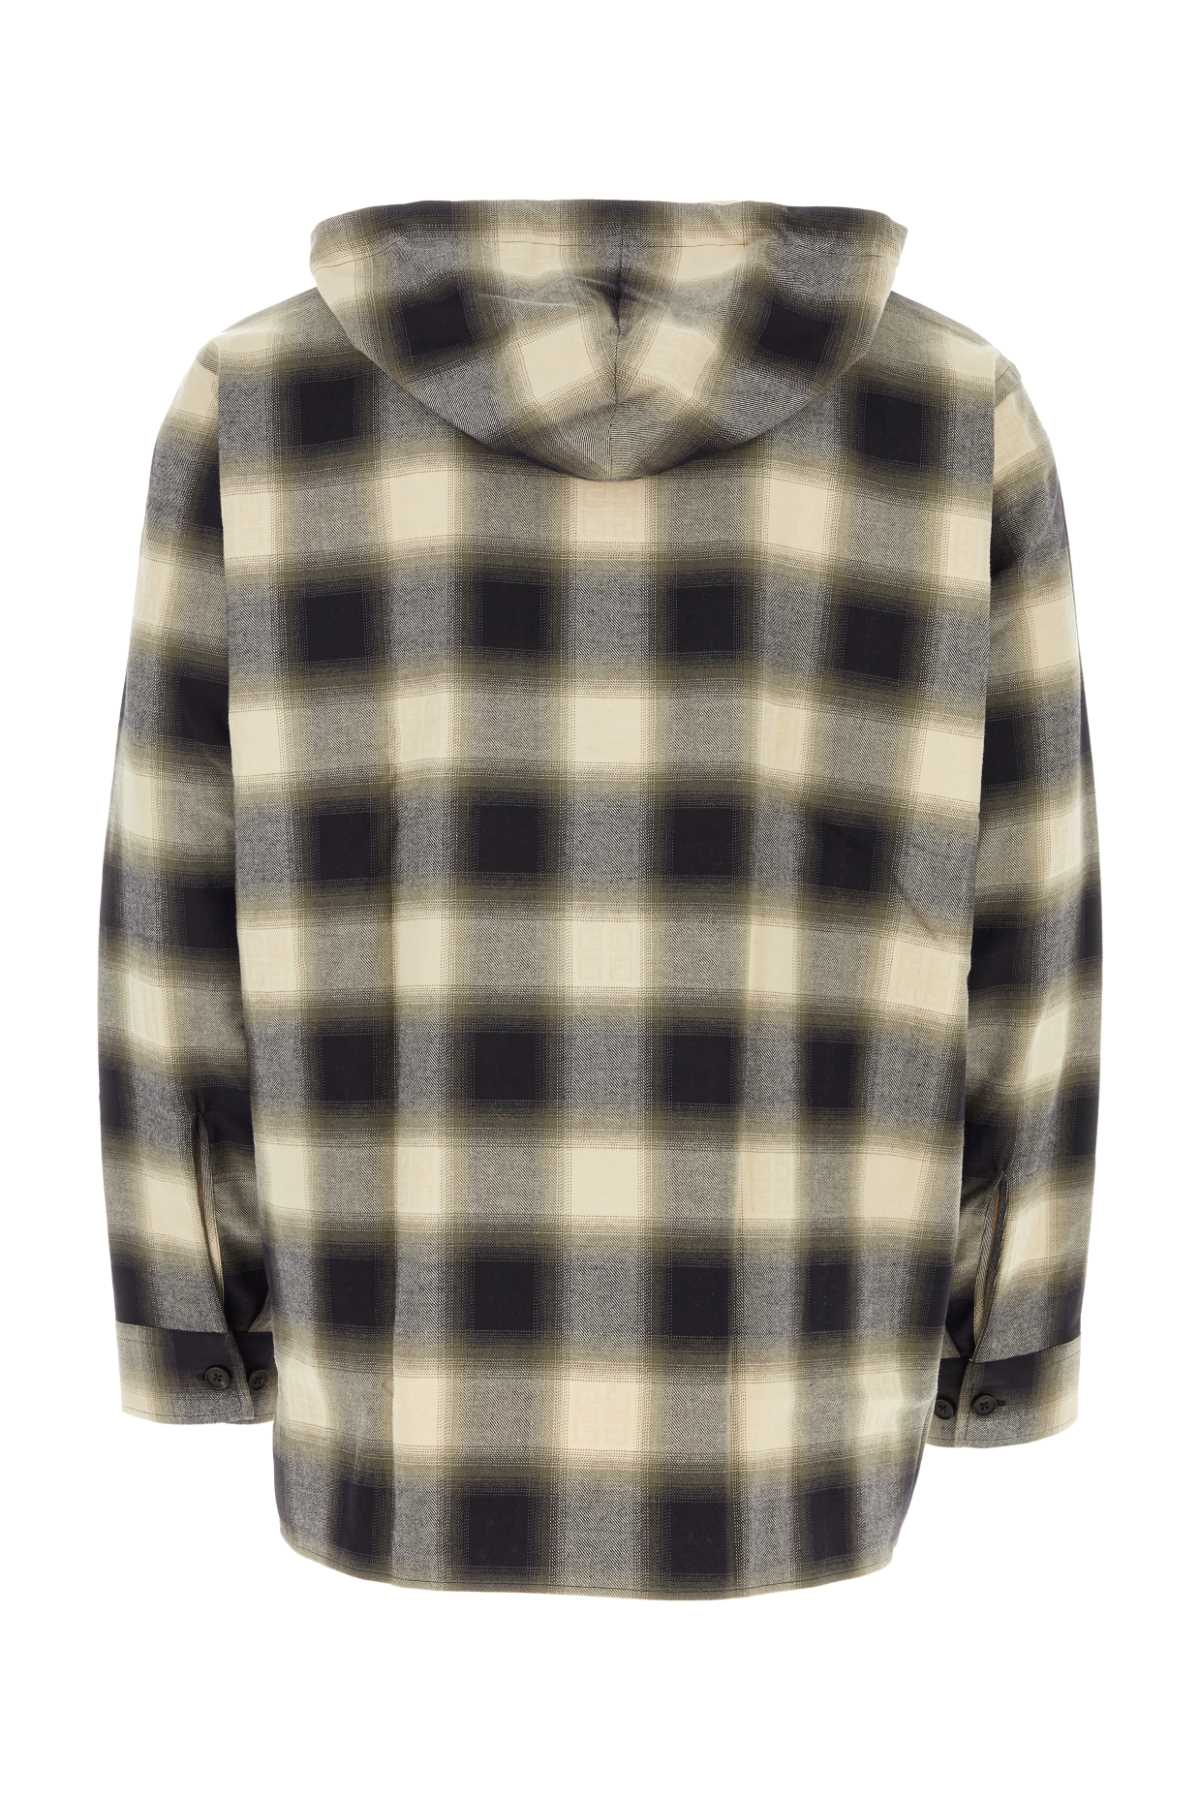 GIVENCHY EMBROIDERED FLANEL OVERSIZE SHIRT